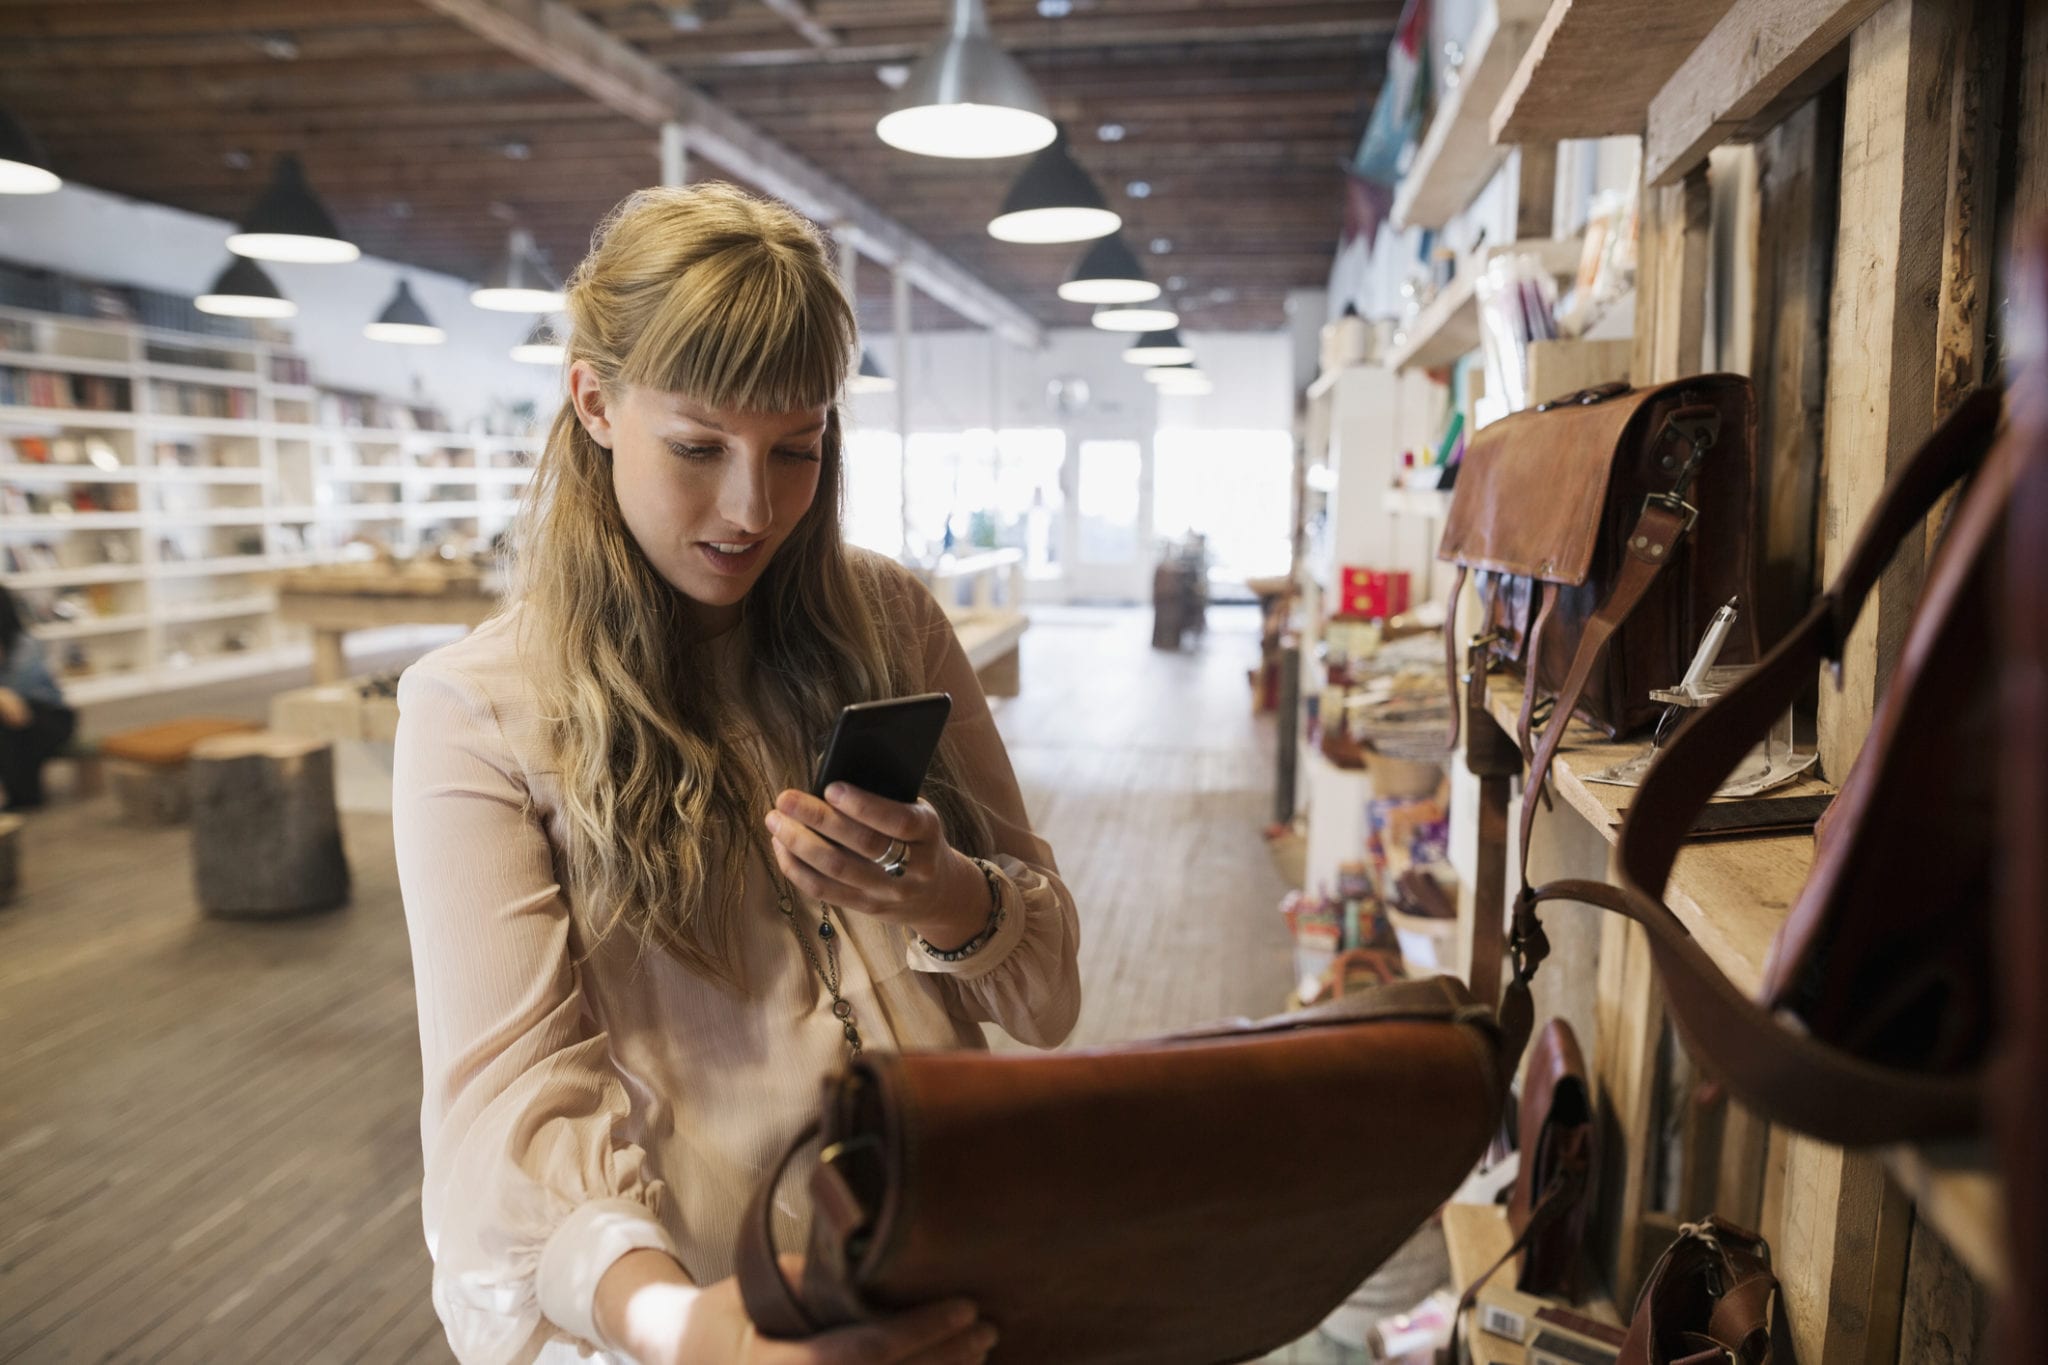 Retail technologies bring businesses, consumers together